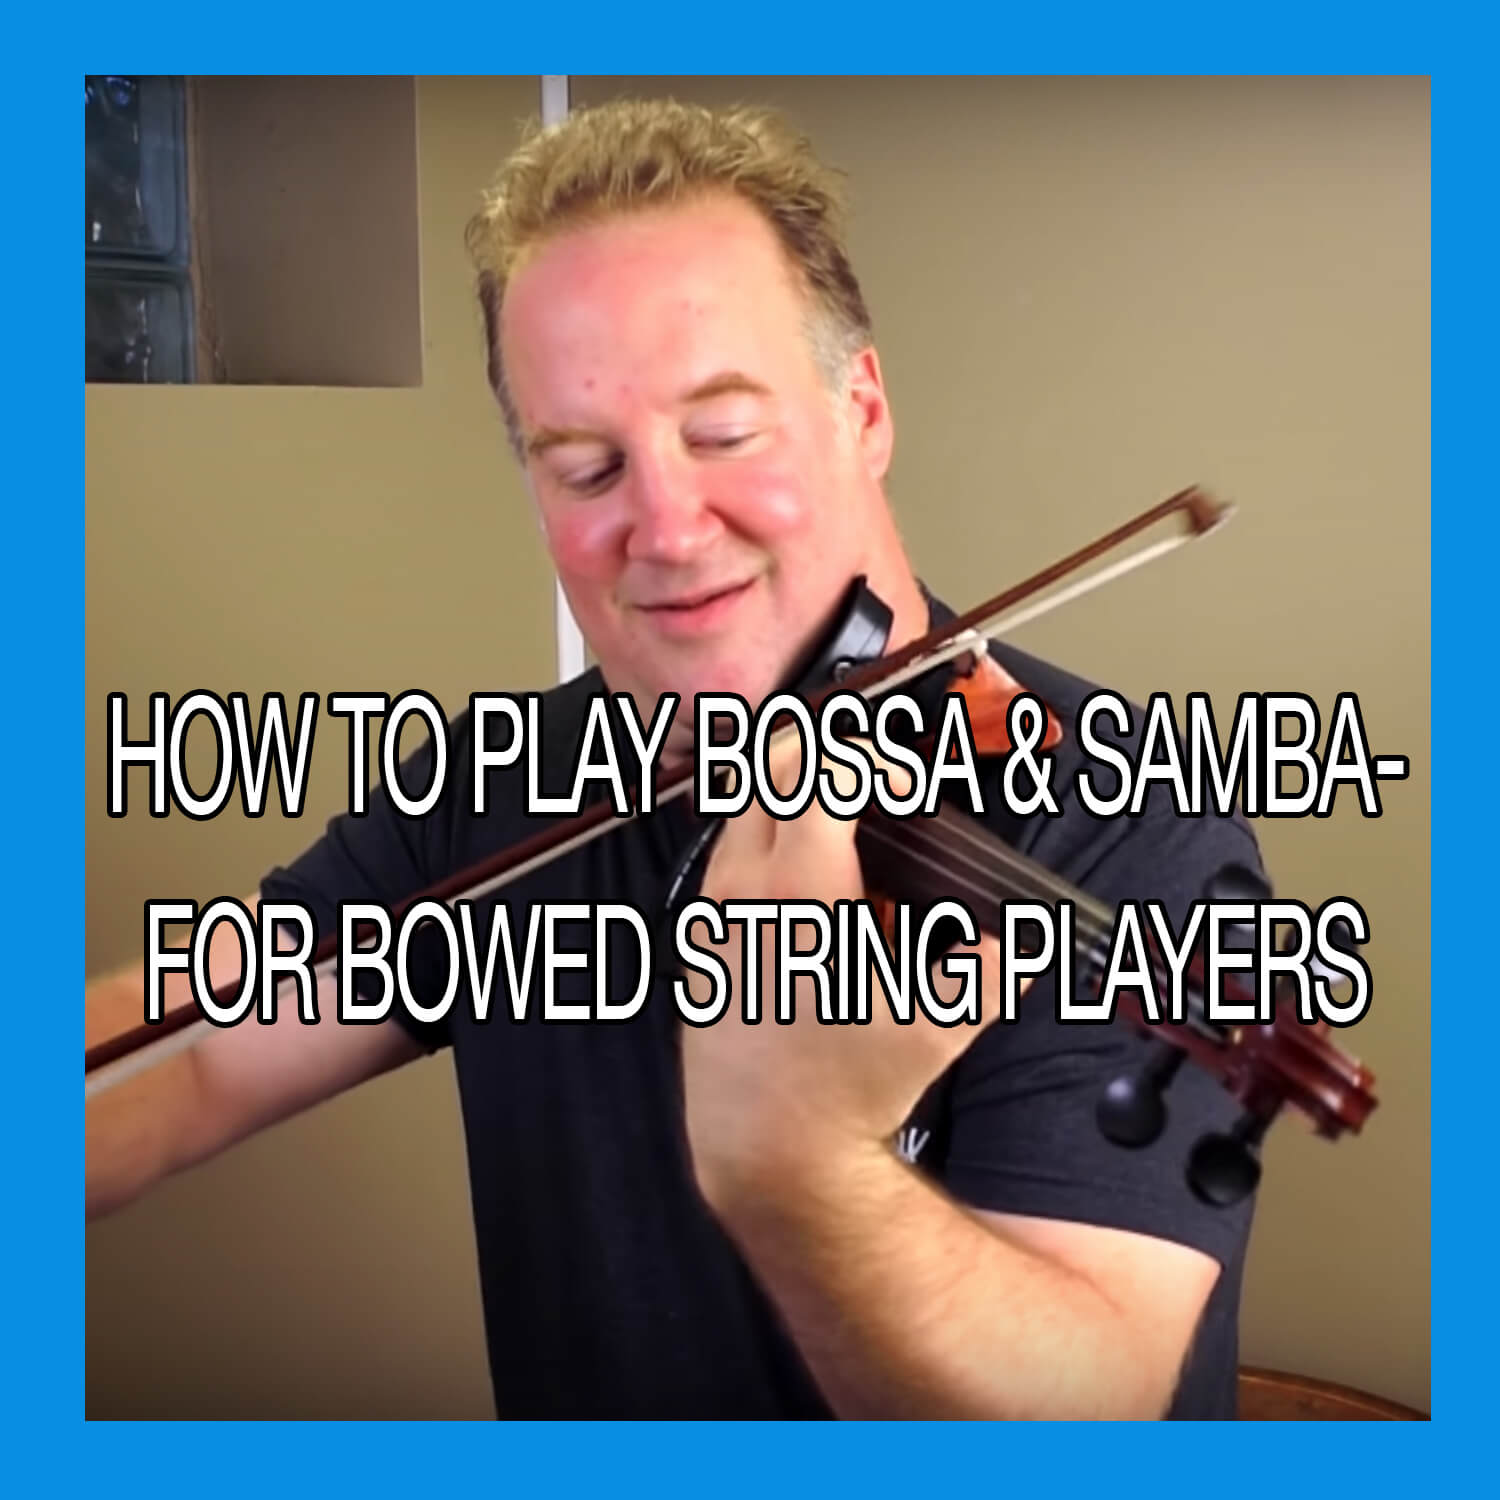 how to play bossa & samba for bowed string players